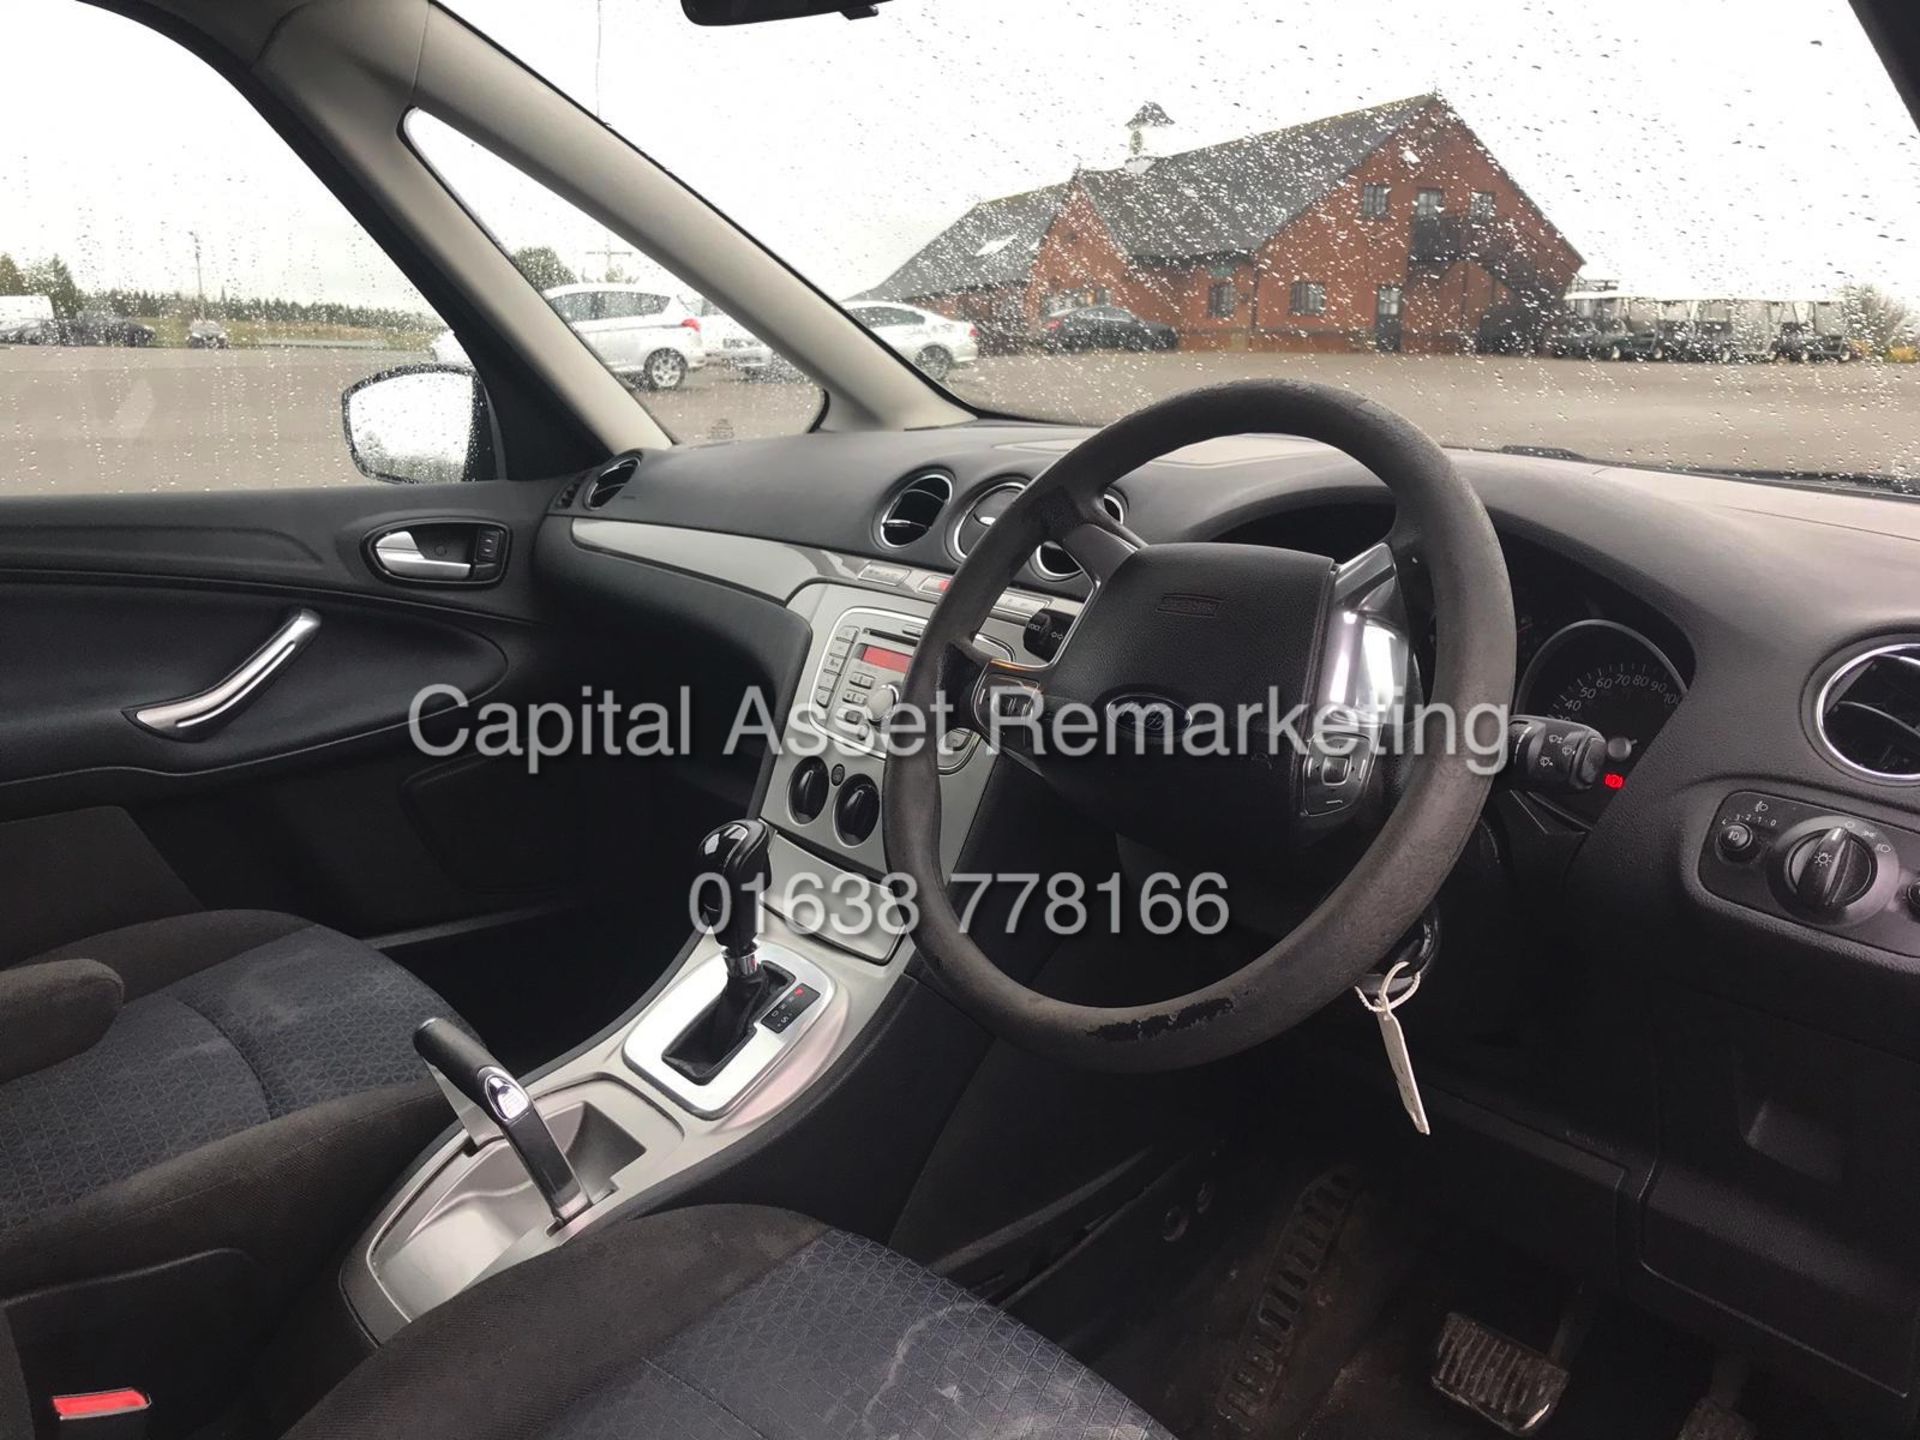 (ON SALE) FORD GALAXY 2.0TDCI "EDGE" 7 SEATER - 08 REG - AIR CON - 1 PREVIOUS OWNER - BLACK - Image 9 of 14